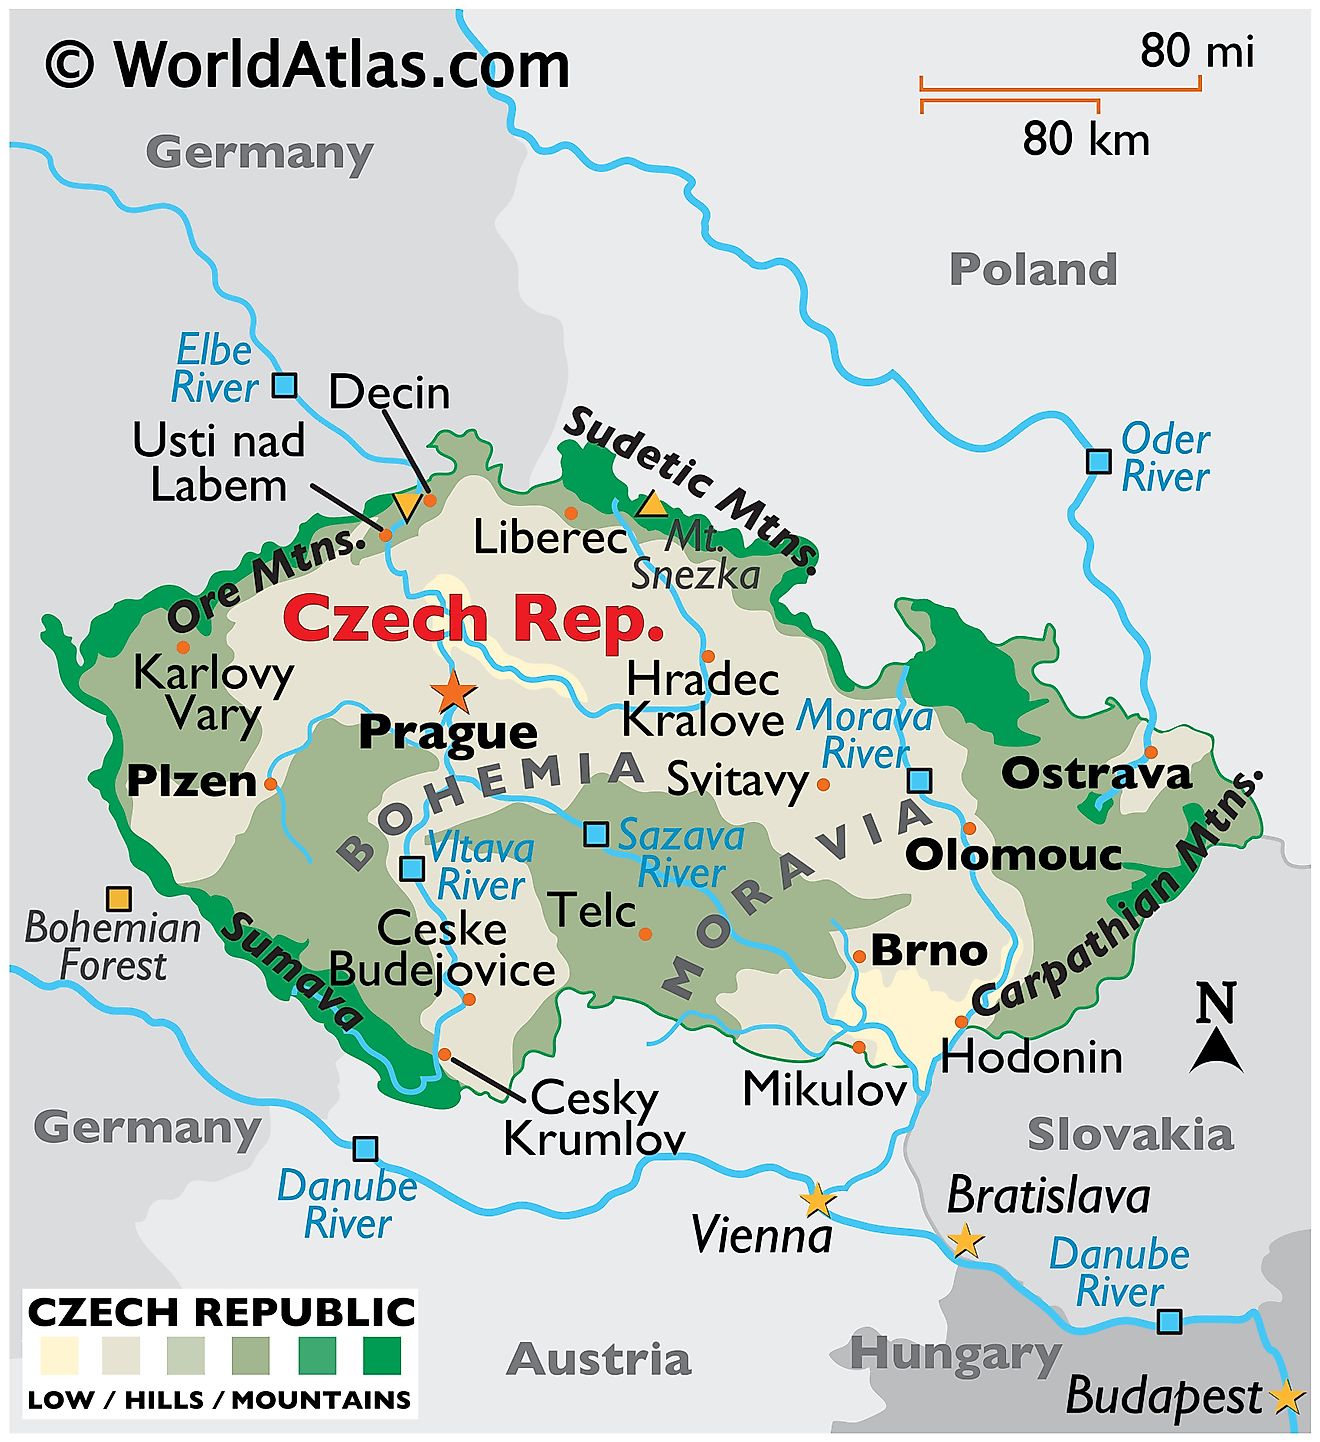 Physical Map of the Czech Republic showing terrain, major rivers, extreme points, important cities, international boundaries, etc.